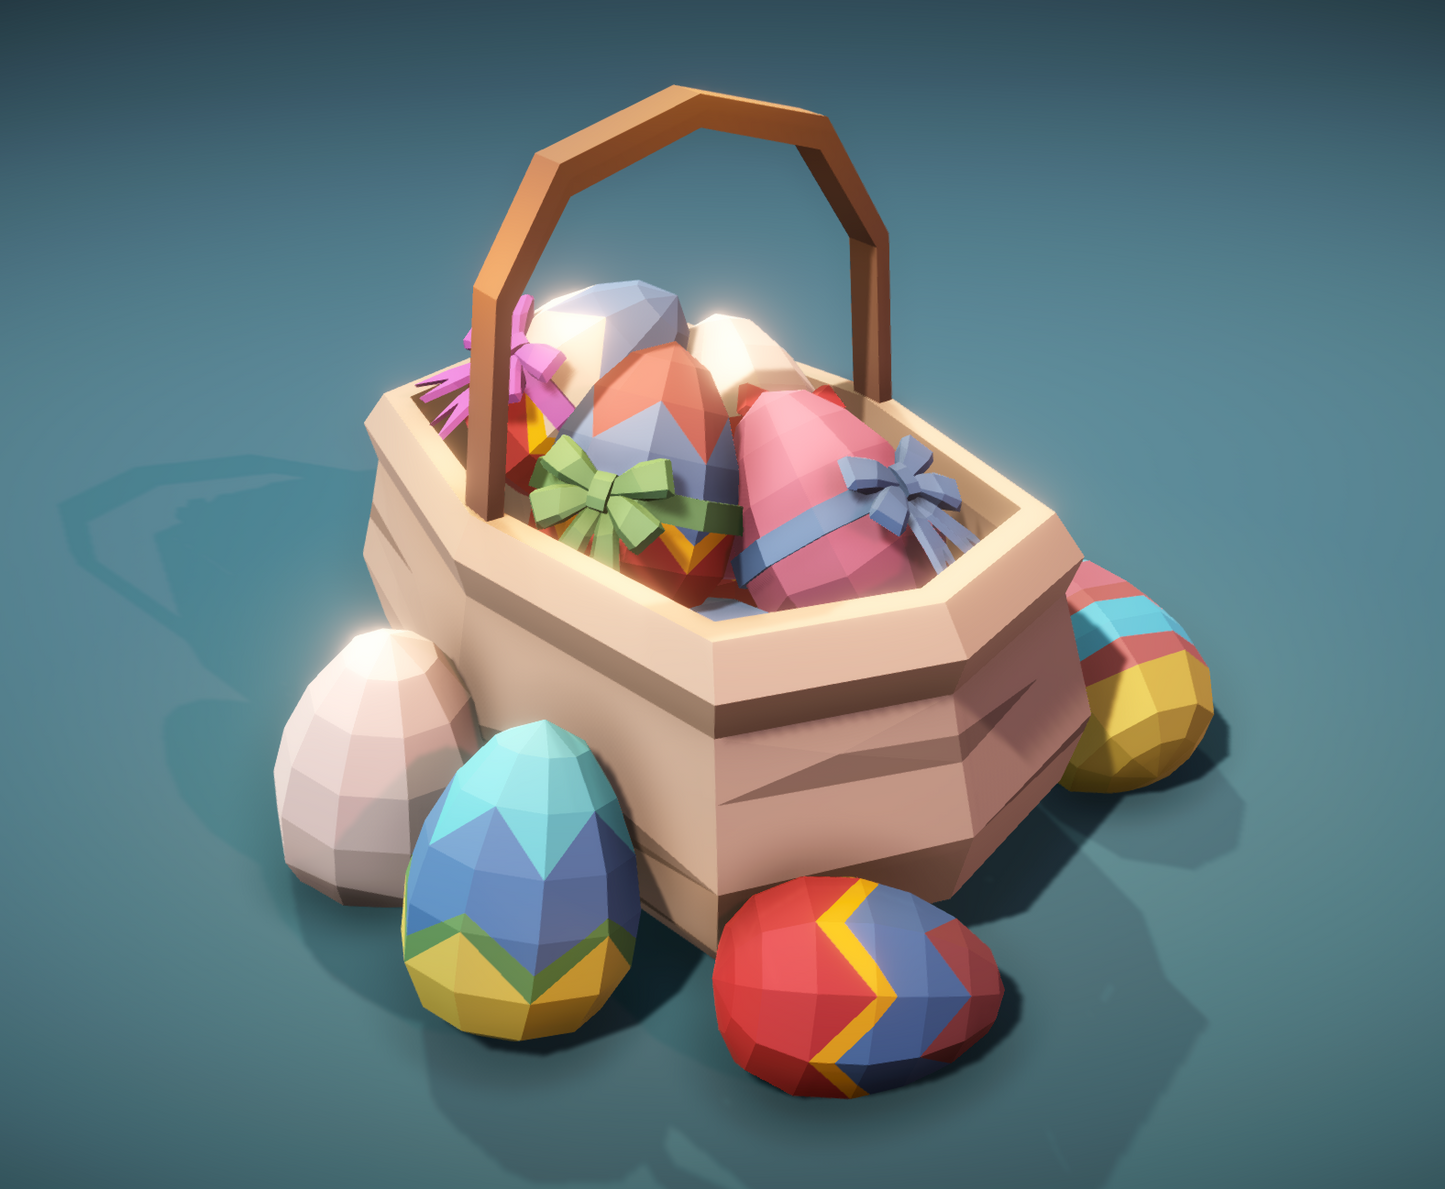 Polygon Easter 3D asset pack for Unity and Unreal Engine game development